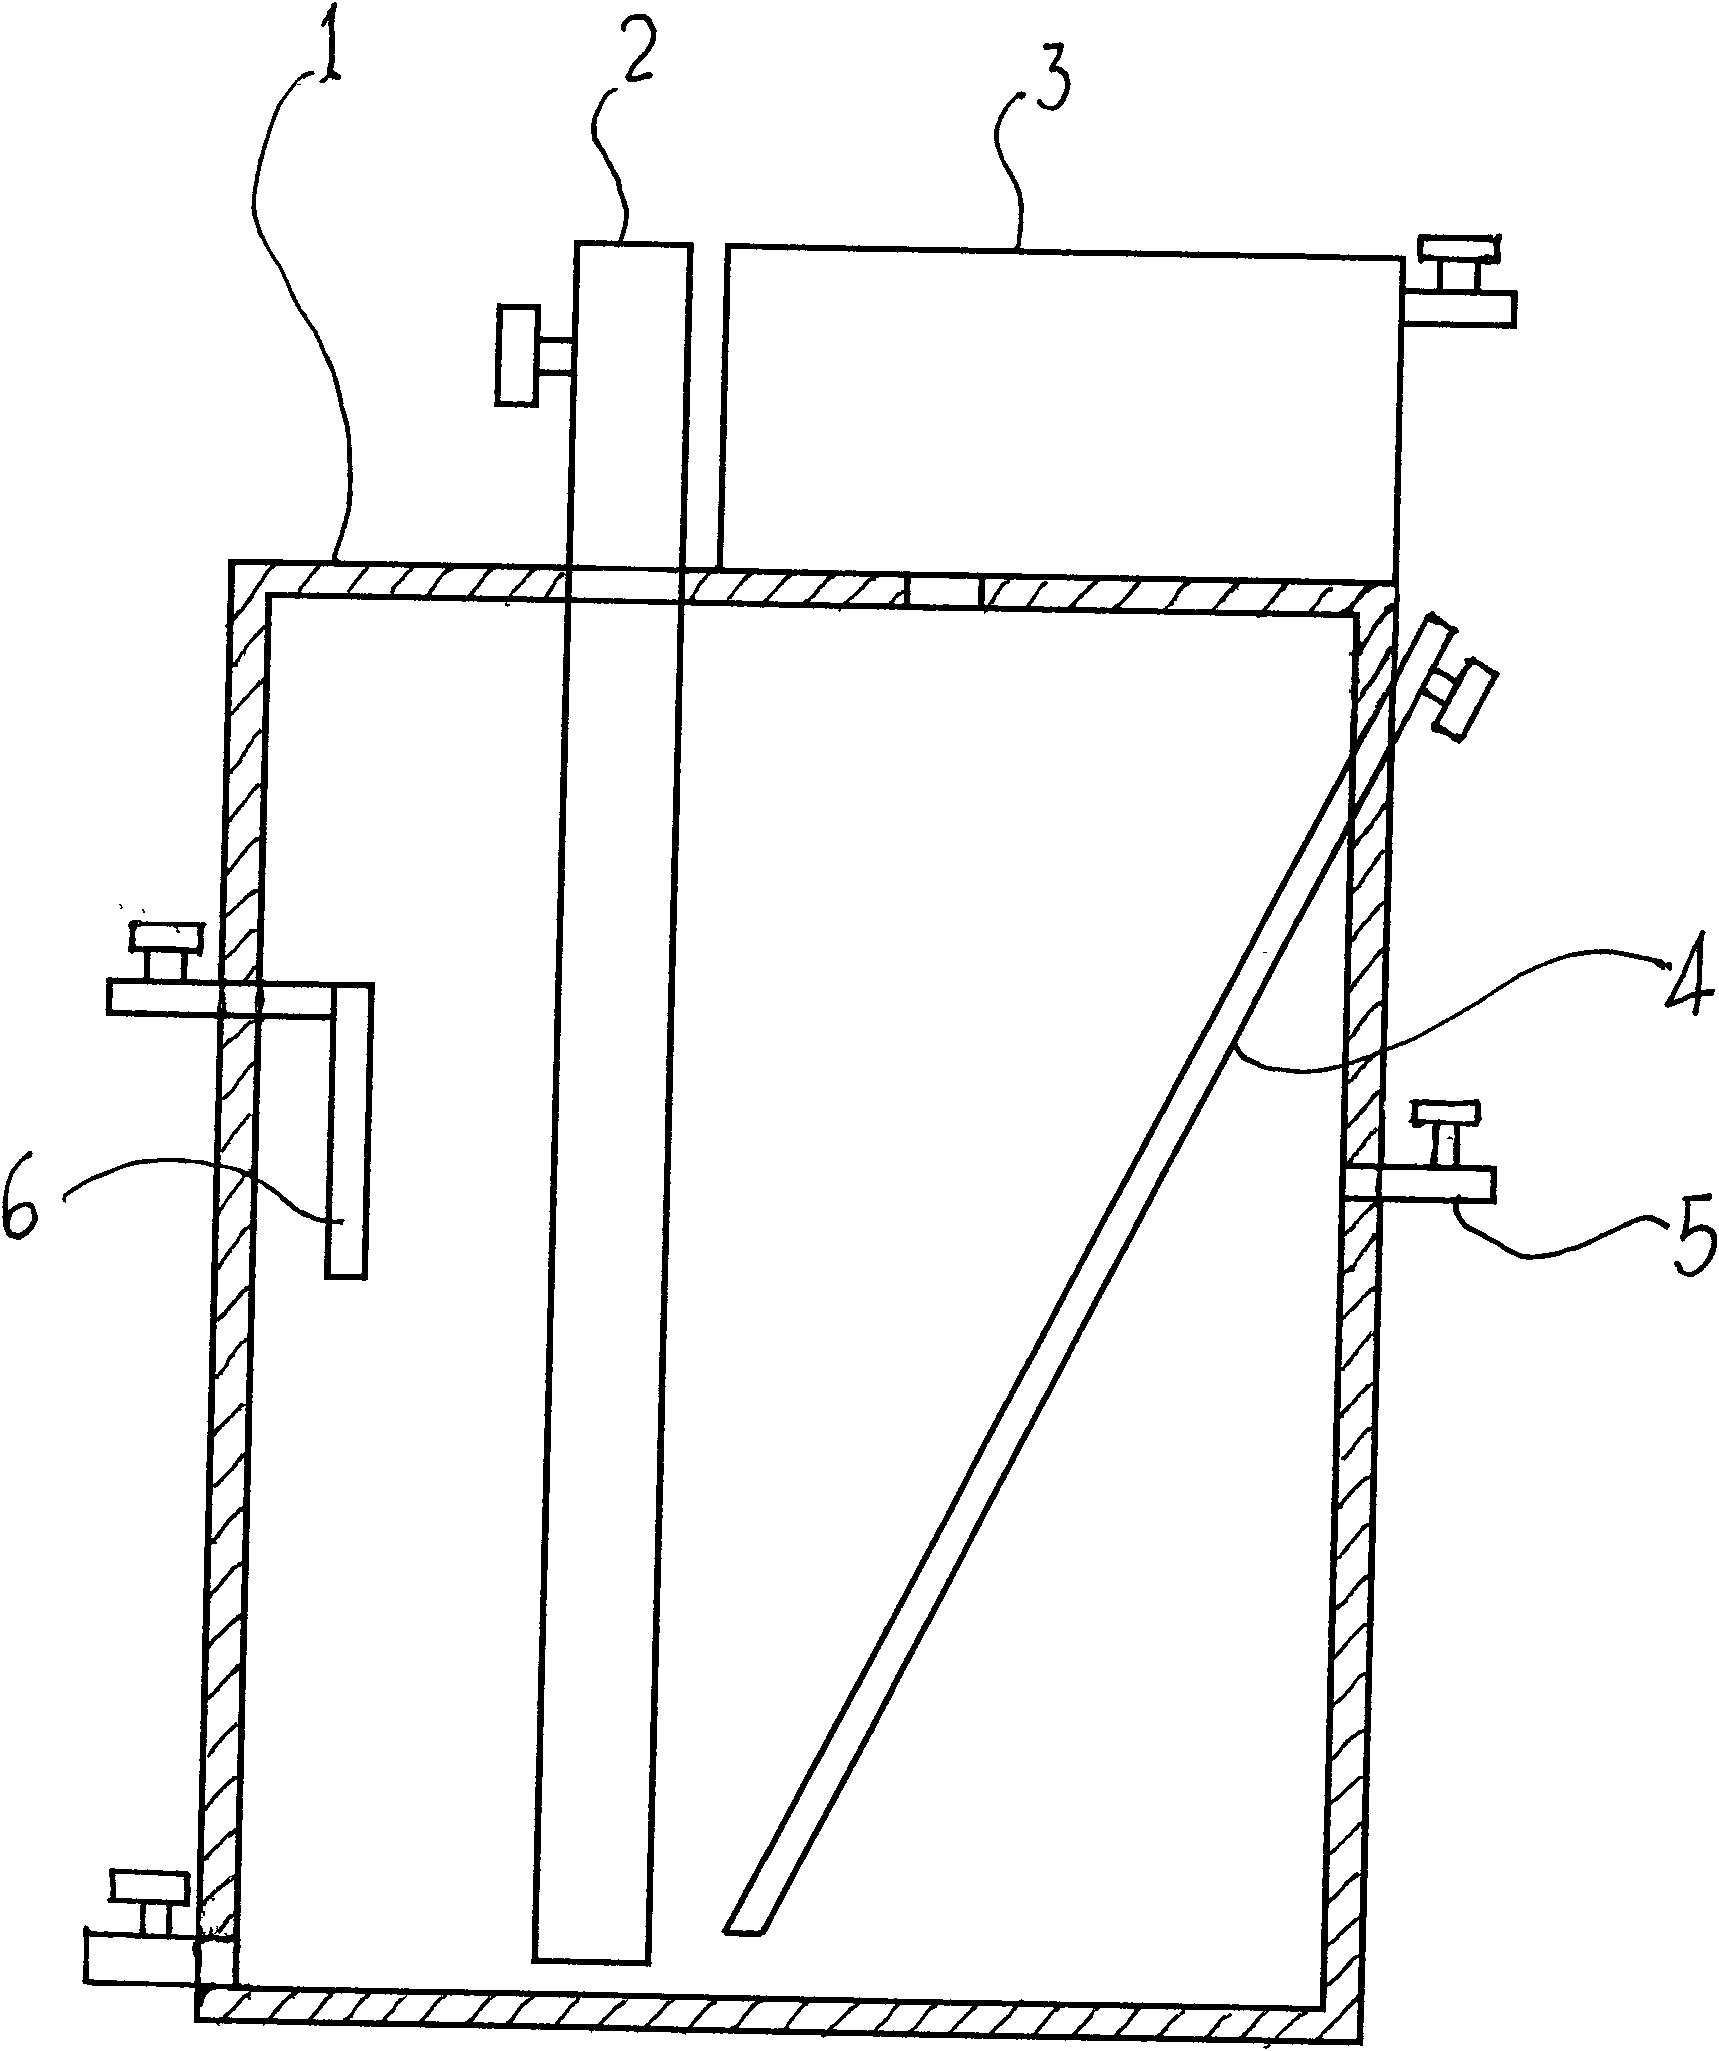 Device for automatically skimming sewage to generate methane for increasing value